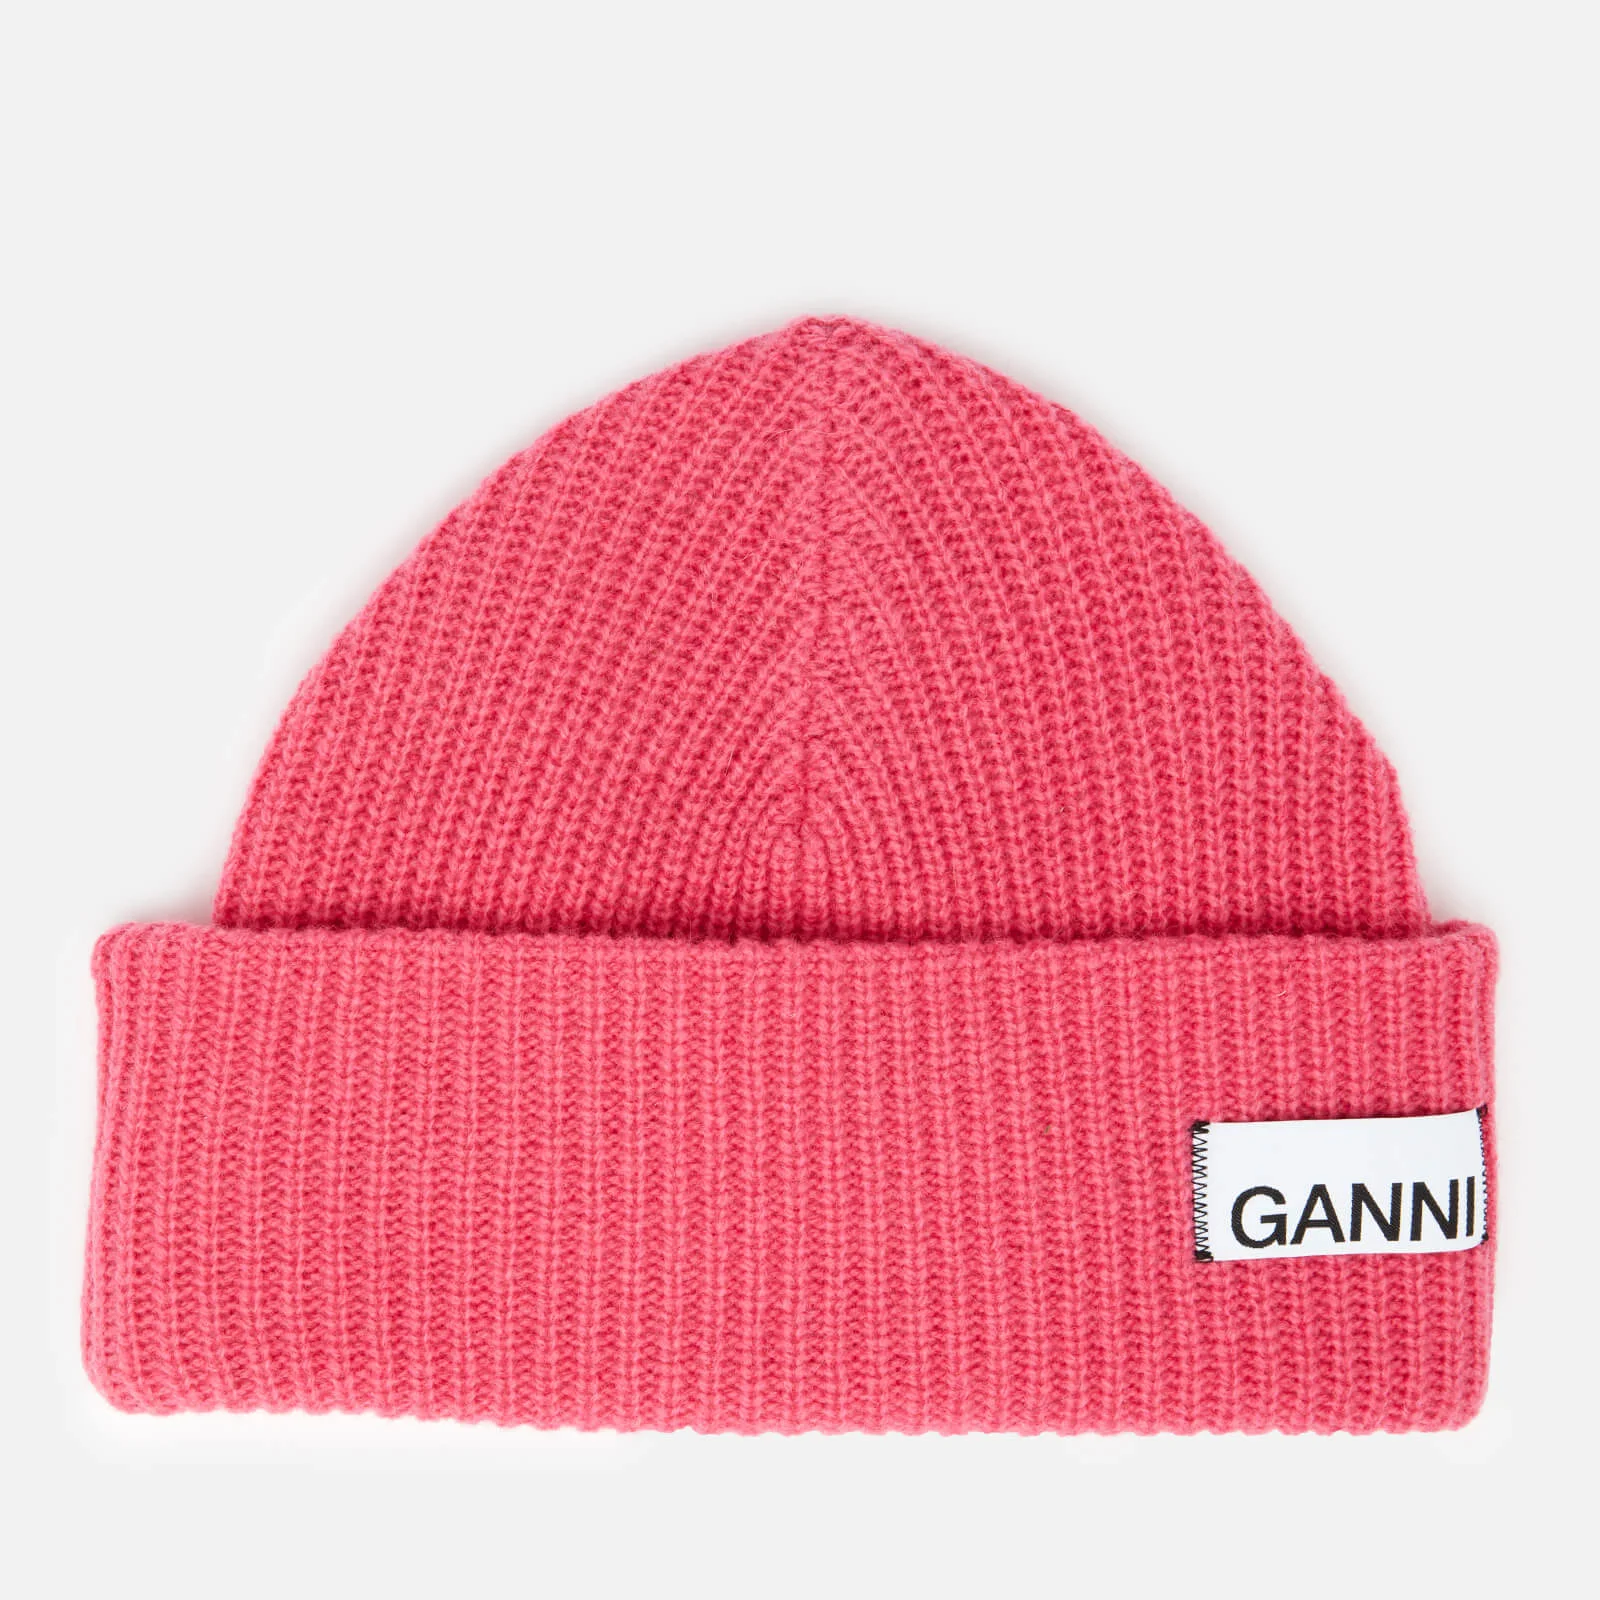 Ganni Women's Knitted Beanie - Hot Pink Image 1